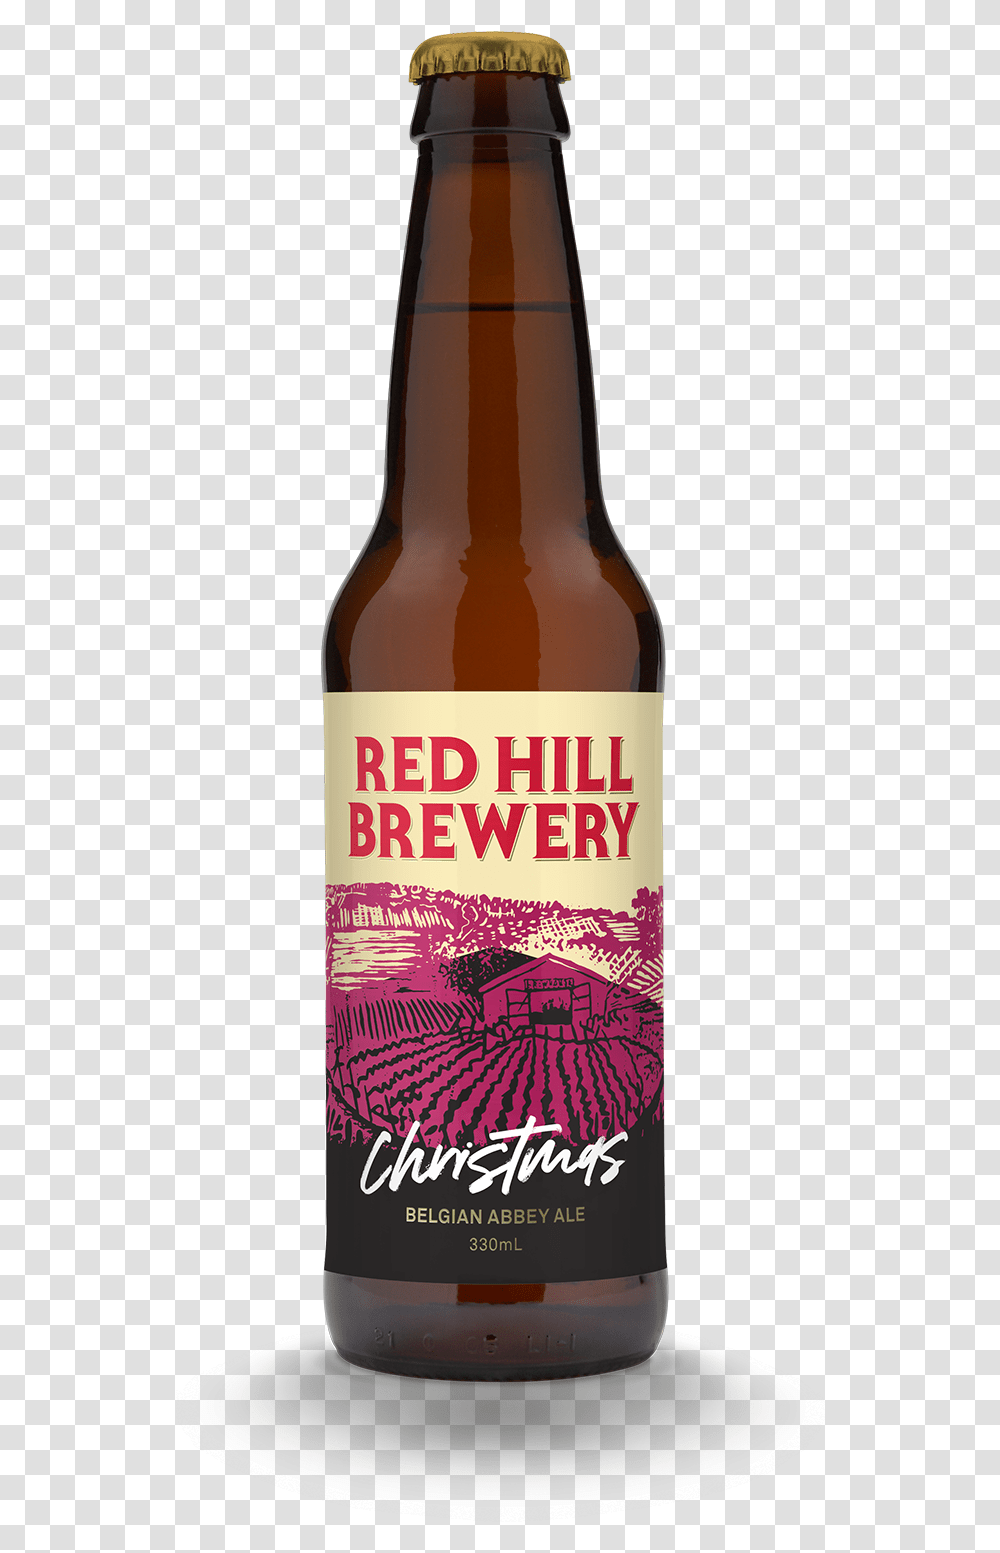 Red Hill Brewery Christmas Ale Tiny Rebel Urban Ipa, Beer, Alcohol, Beverage, Drink Transparent Png